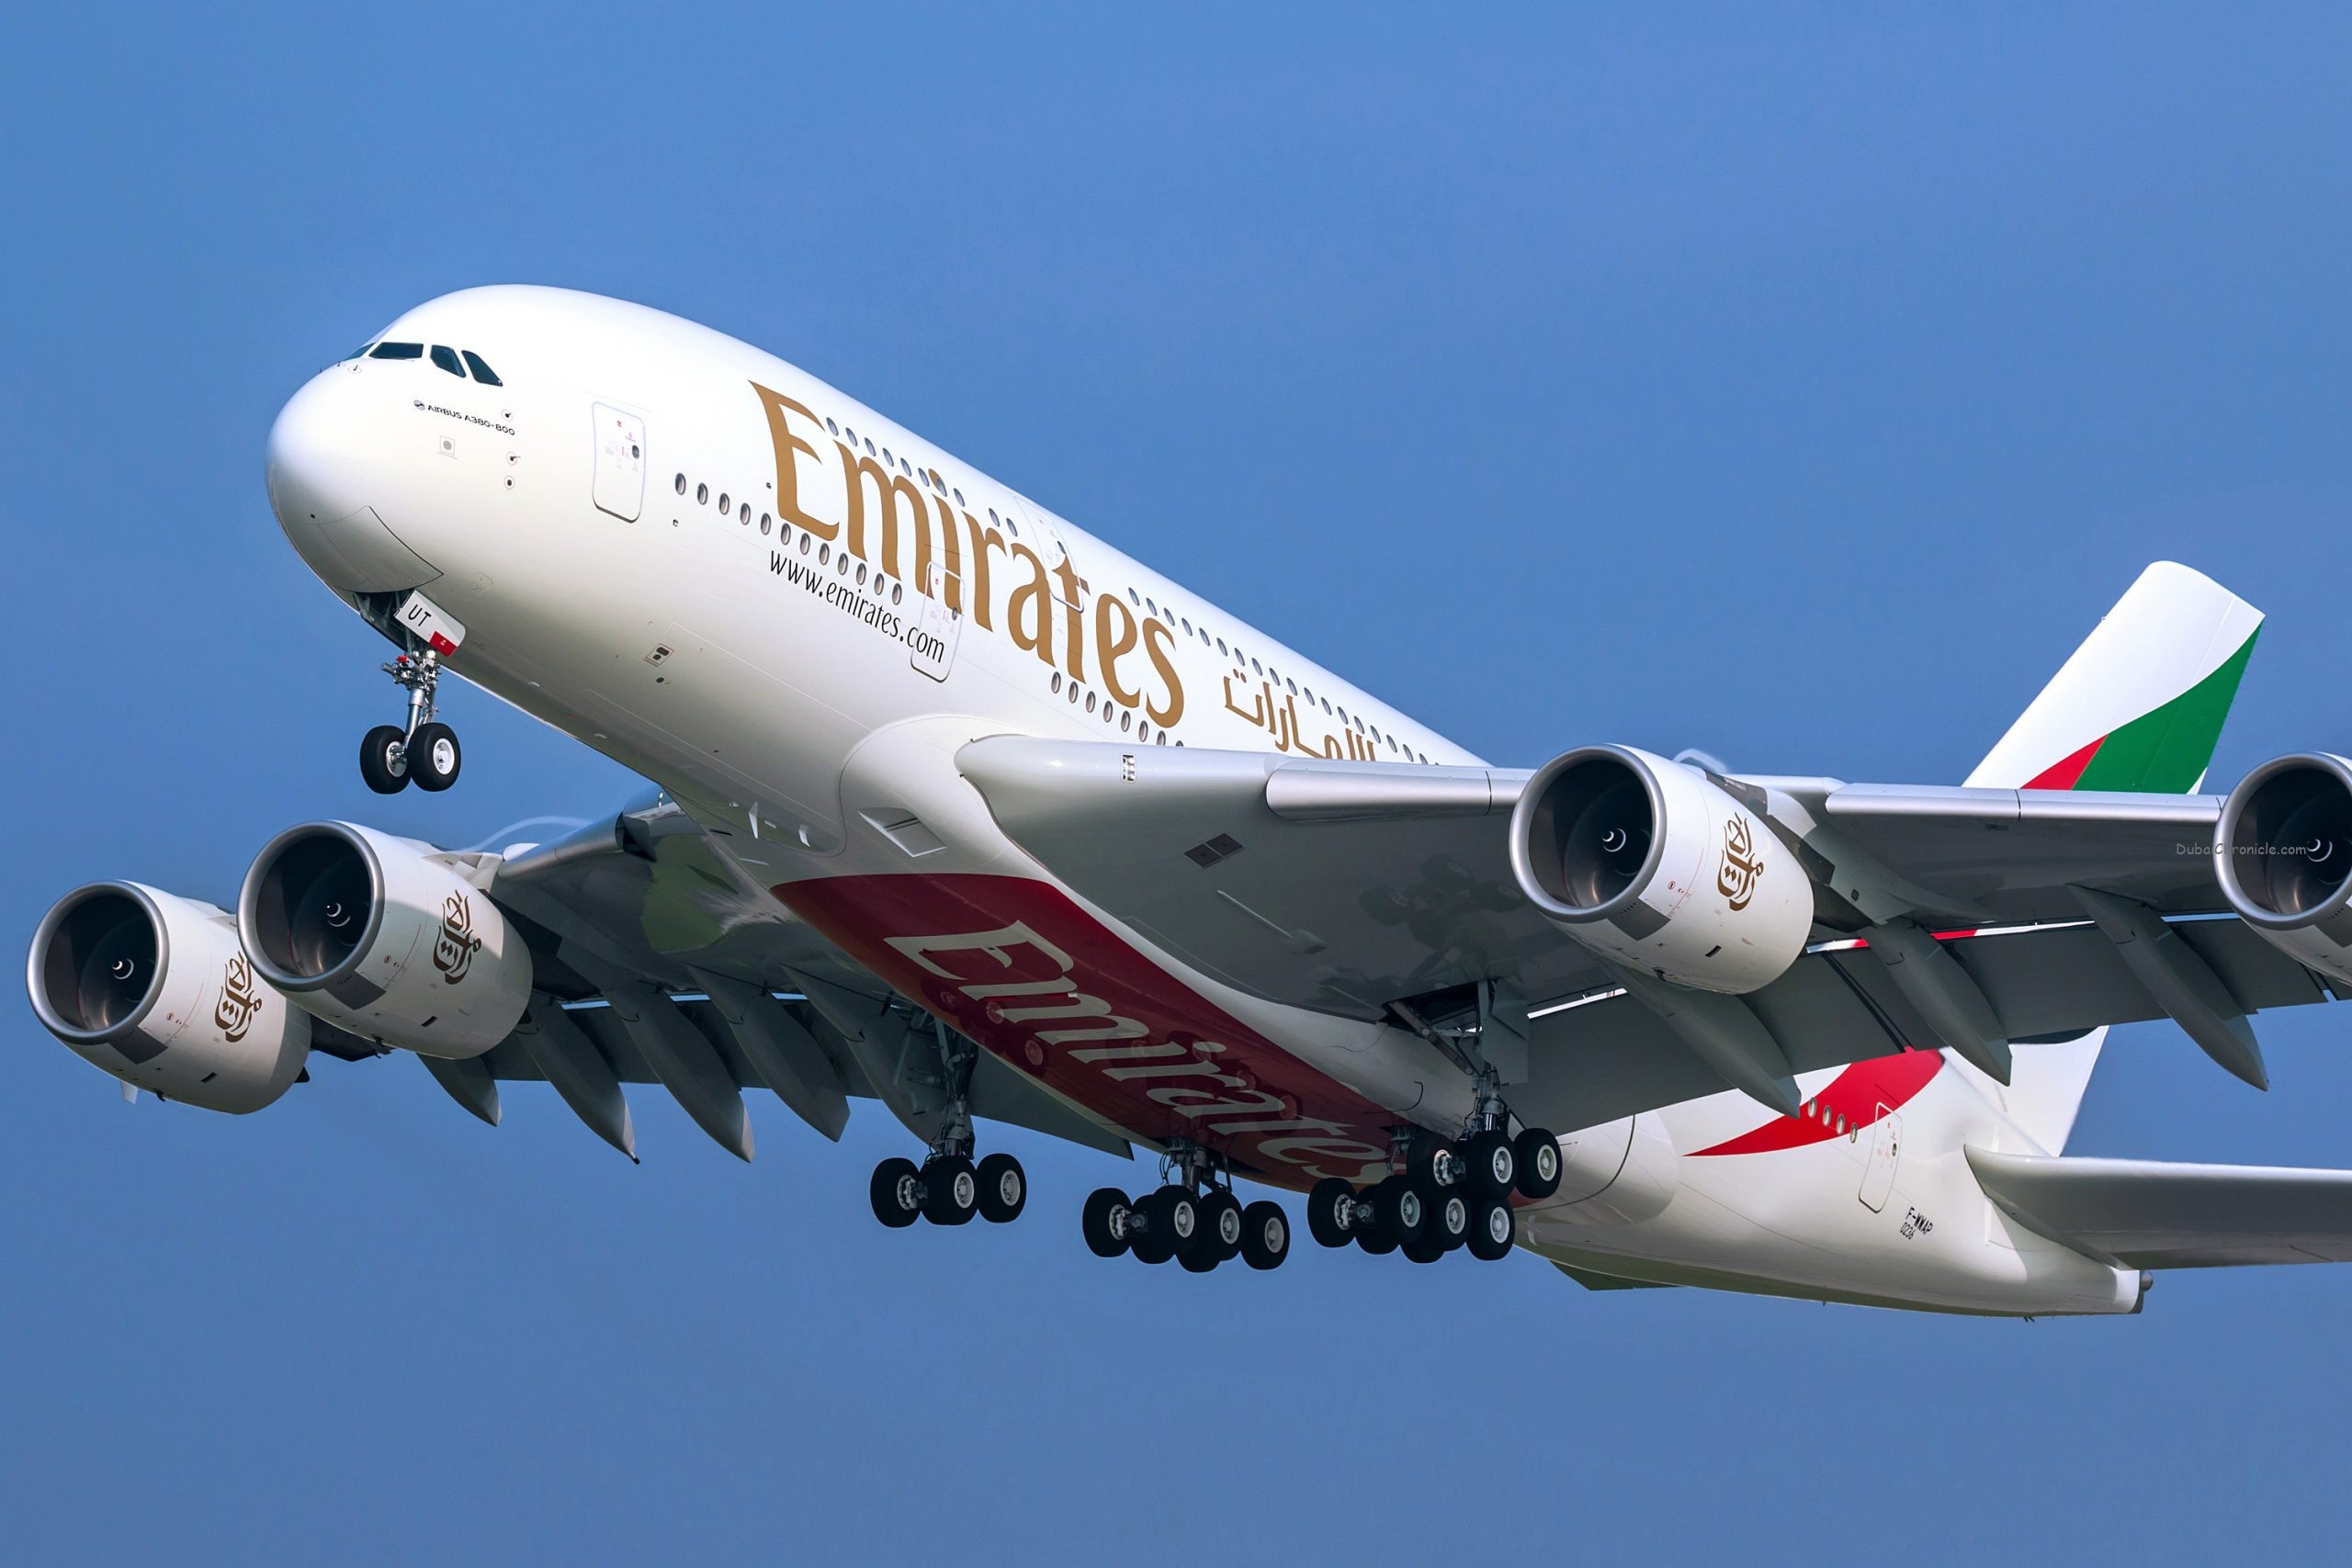 Emirates' A380 network is expanding to 27 cities, and the airline is offering travellers the chance to fly in style with special fares.